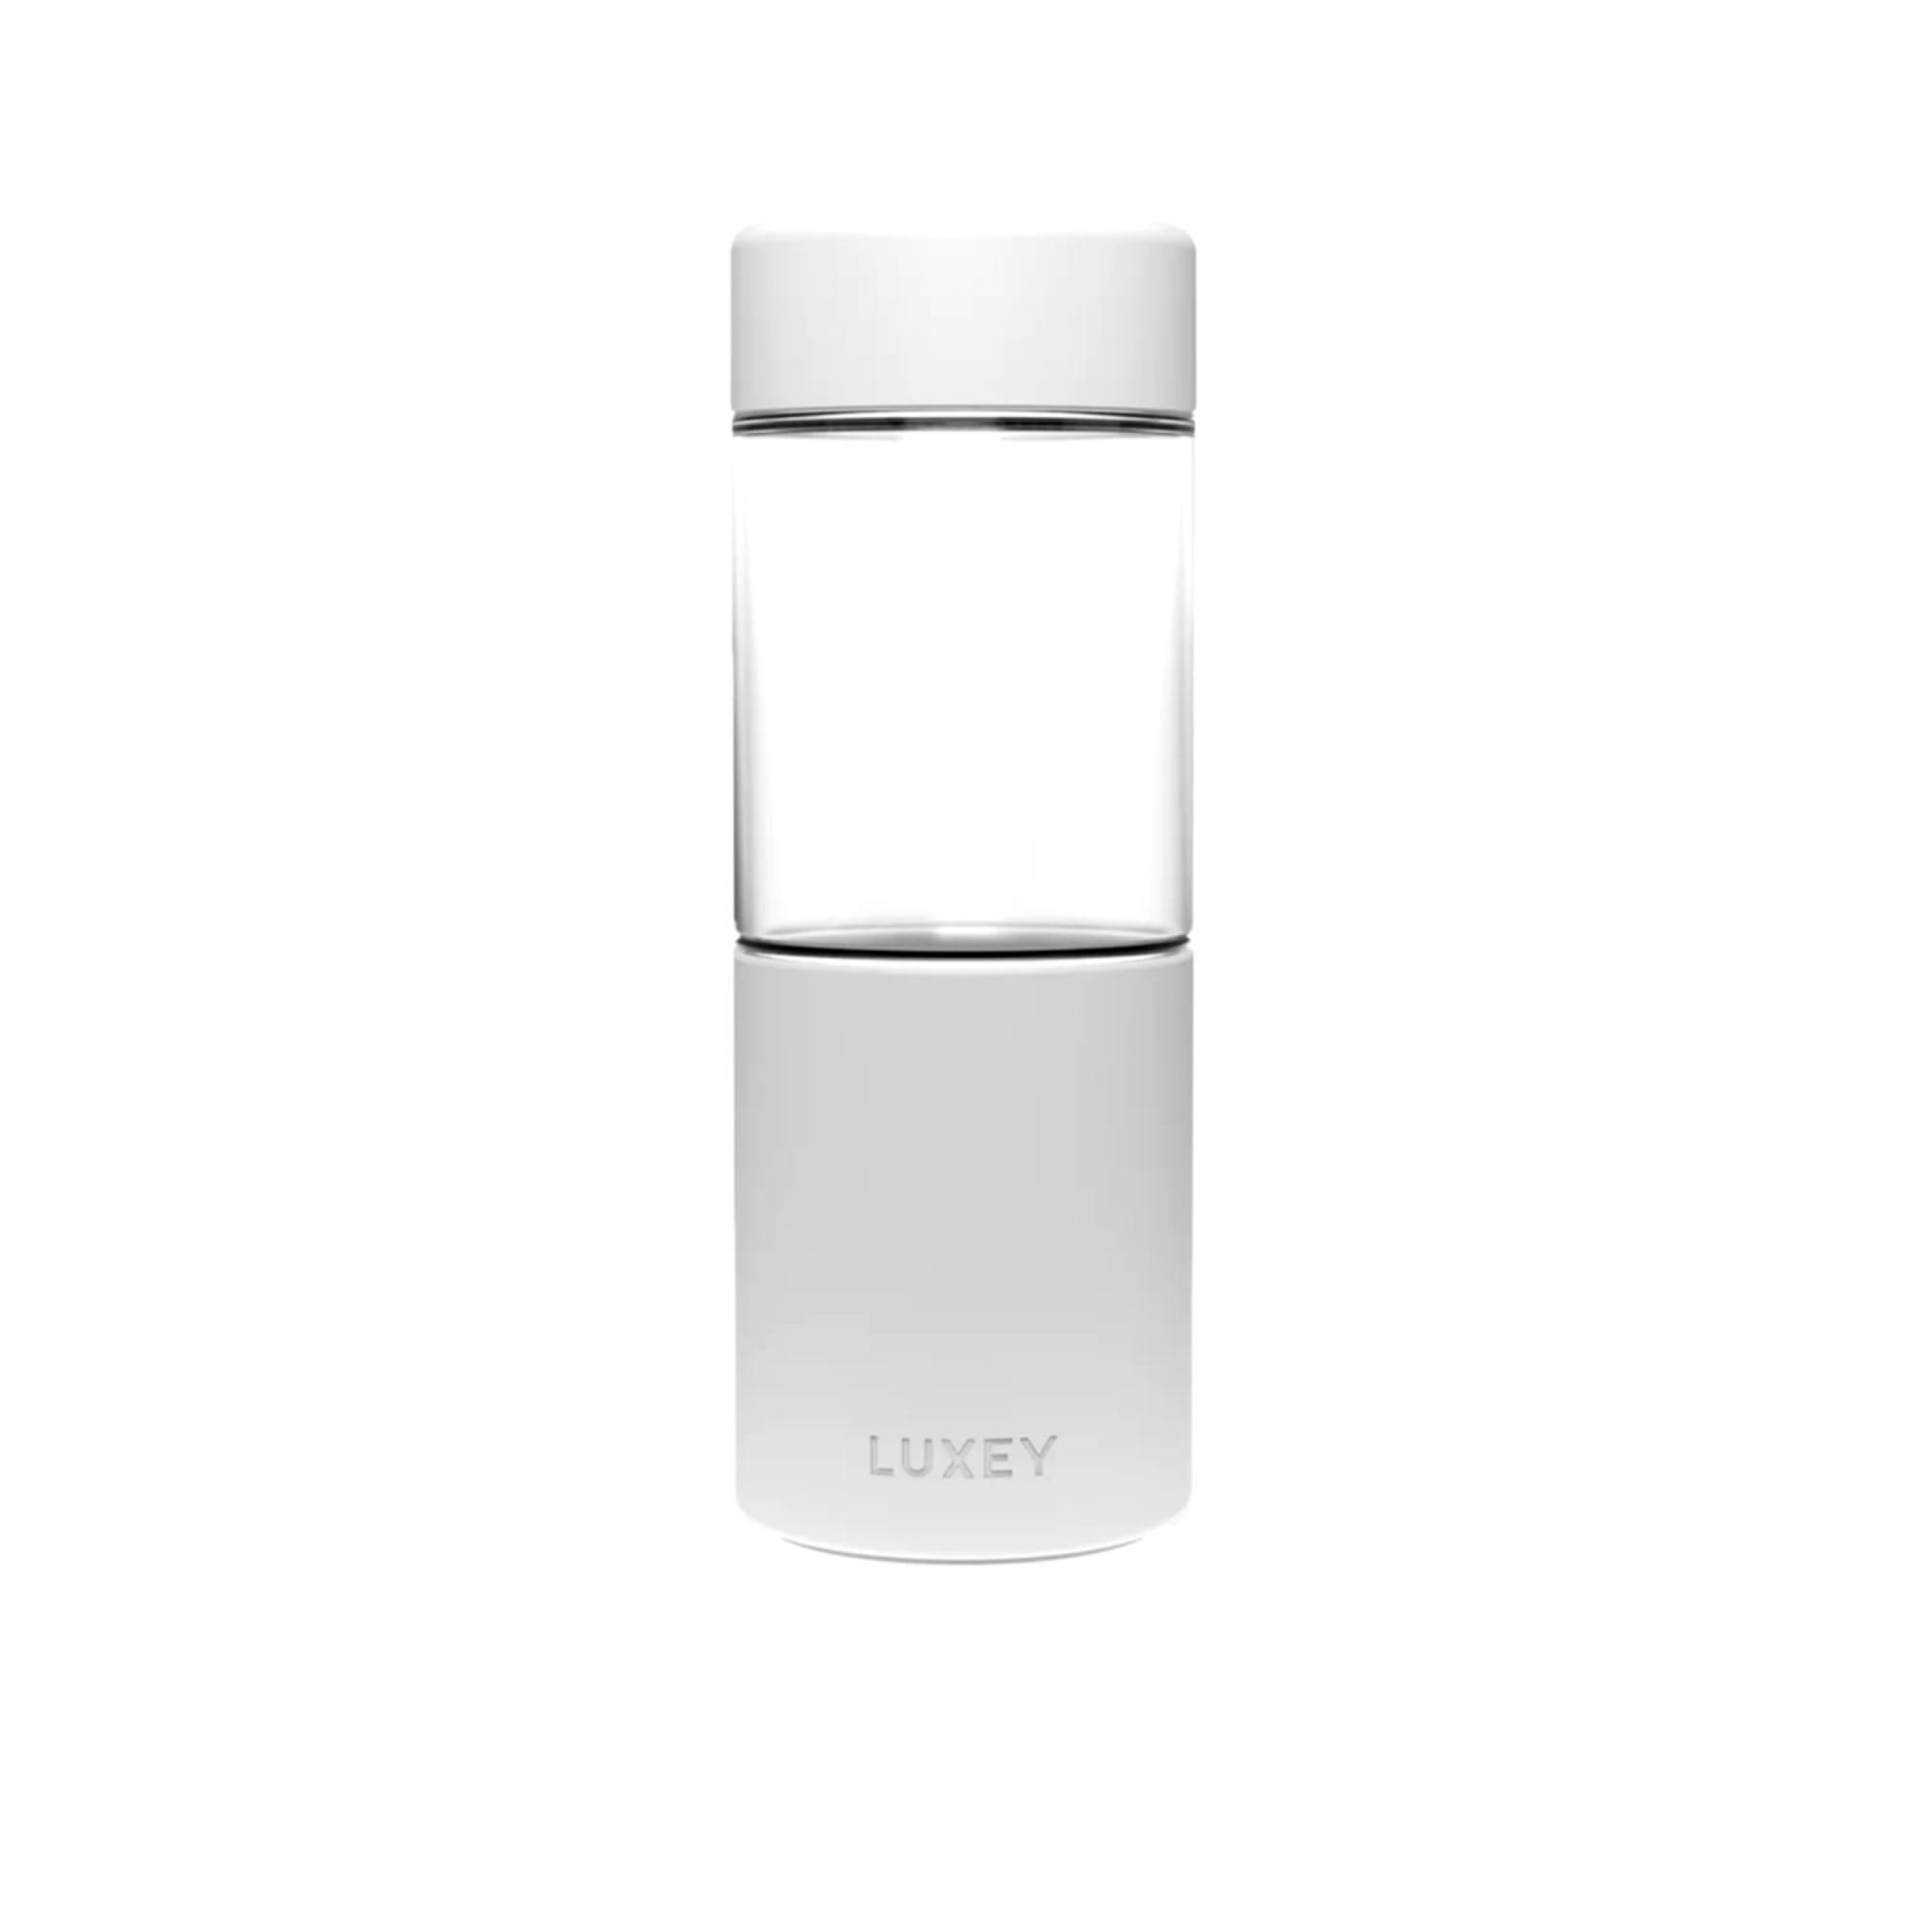 Luxey Cup Glass Coffee and Smoothie Cup 473ml (16oz) White Image 1